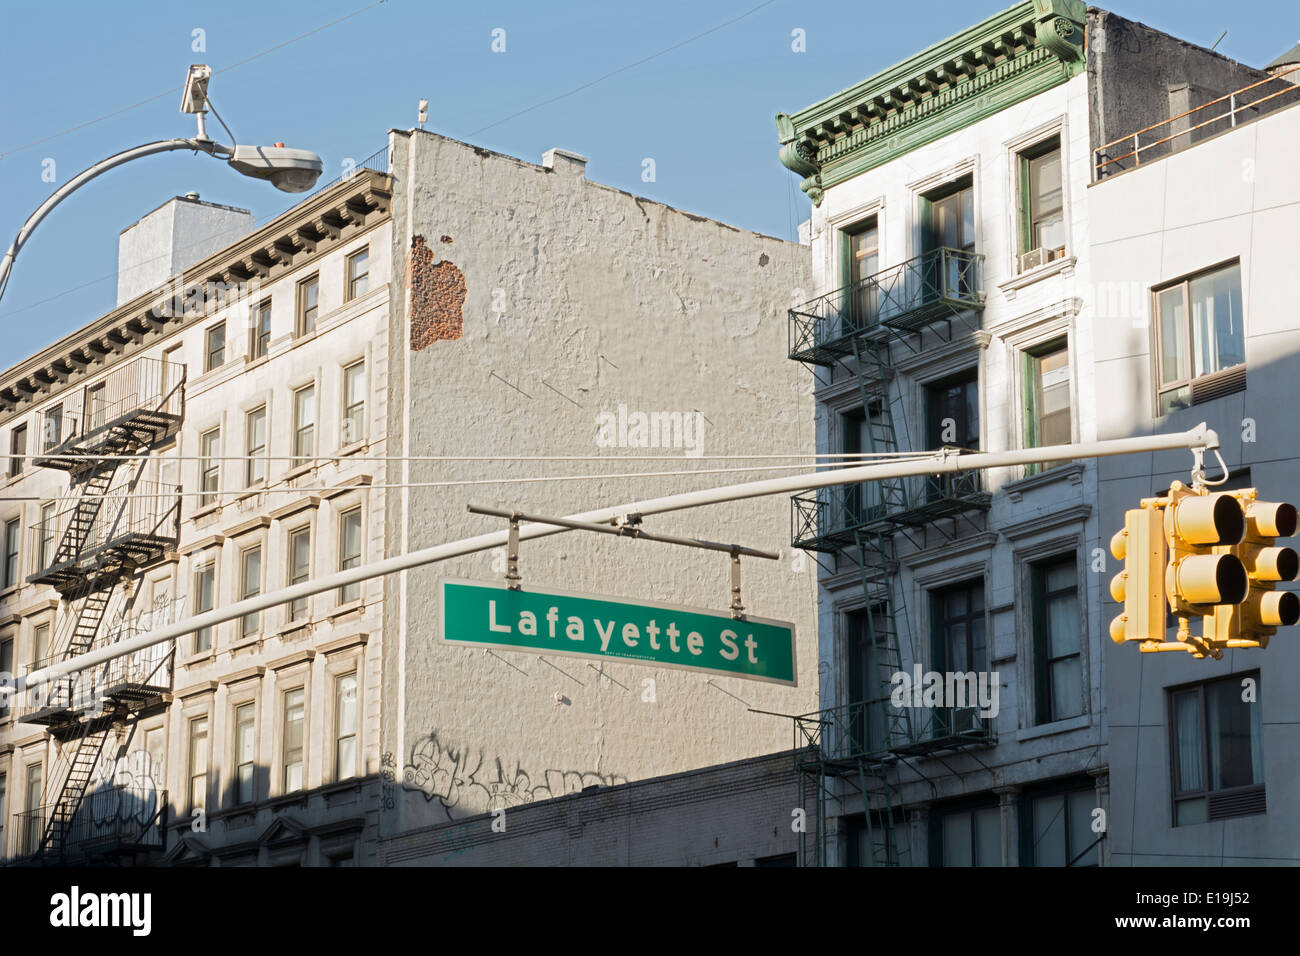 Lafayette Street Sign at Canal Street New York City Stock Photo